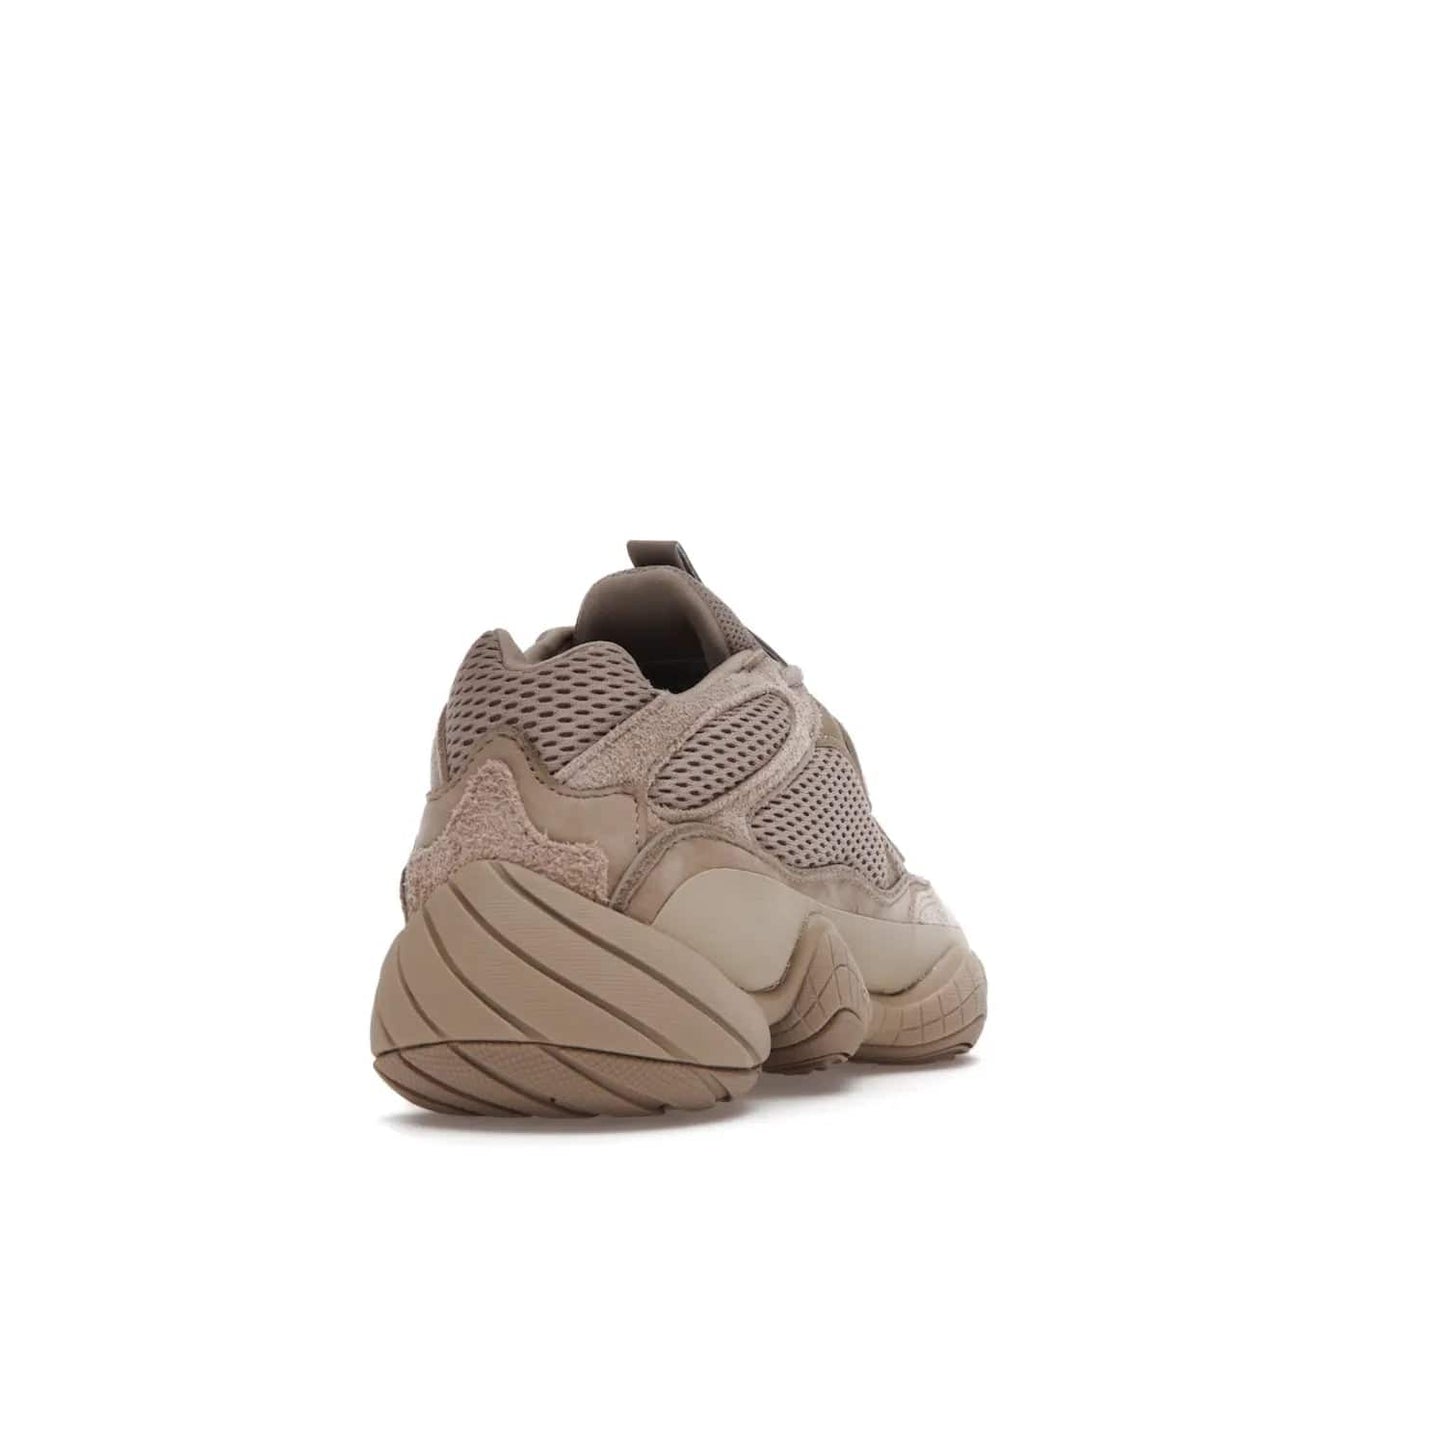 adidas Yeezy 500 Taupe Light - Image 30 - Only at www.BallersClubKickz.com - The adidas Yeezy 500 Taupe Light combines mesh, leather, and suede, with a durable adiPRENE sole for an eye-catching accessory. Reflective piping adds the perfect finishing touches to this unique silhouette. Ideal for any wardrobe, releasing in June 2021.